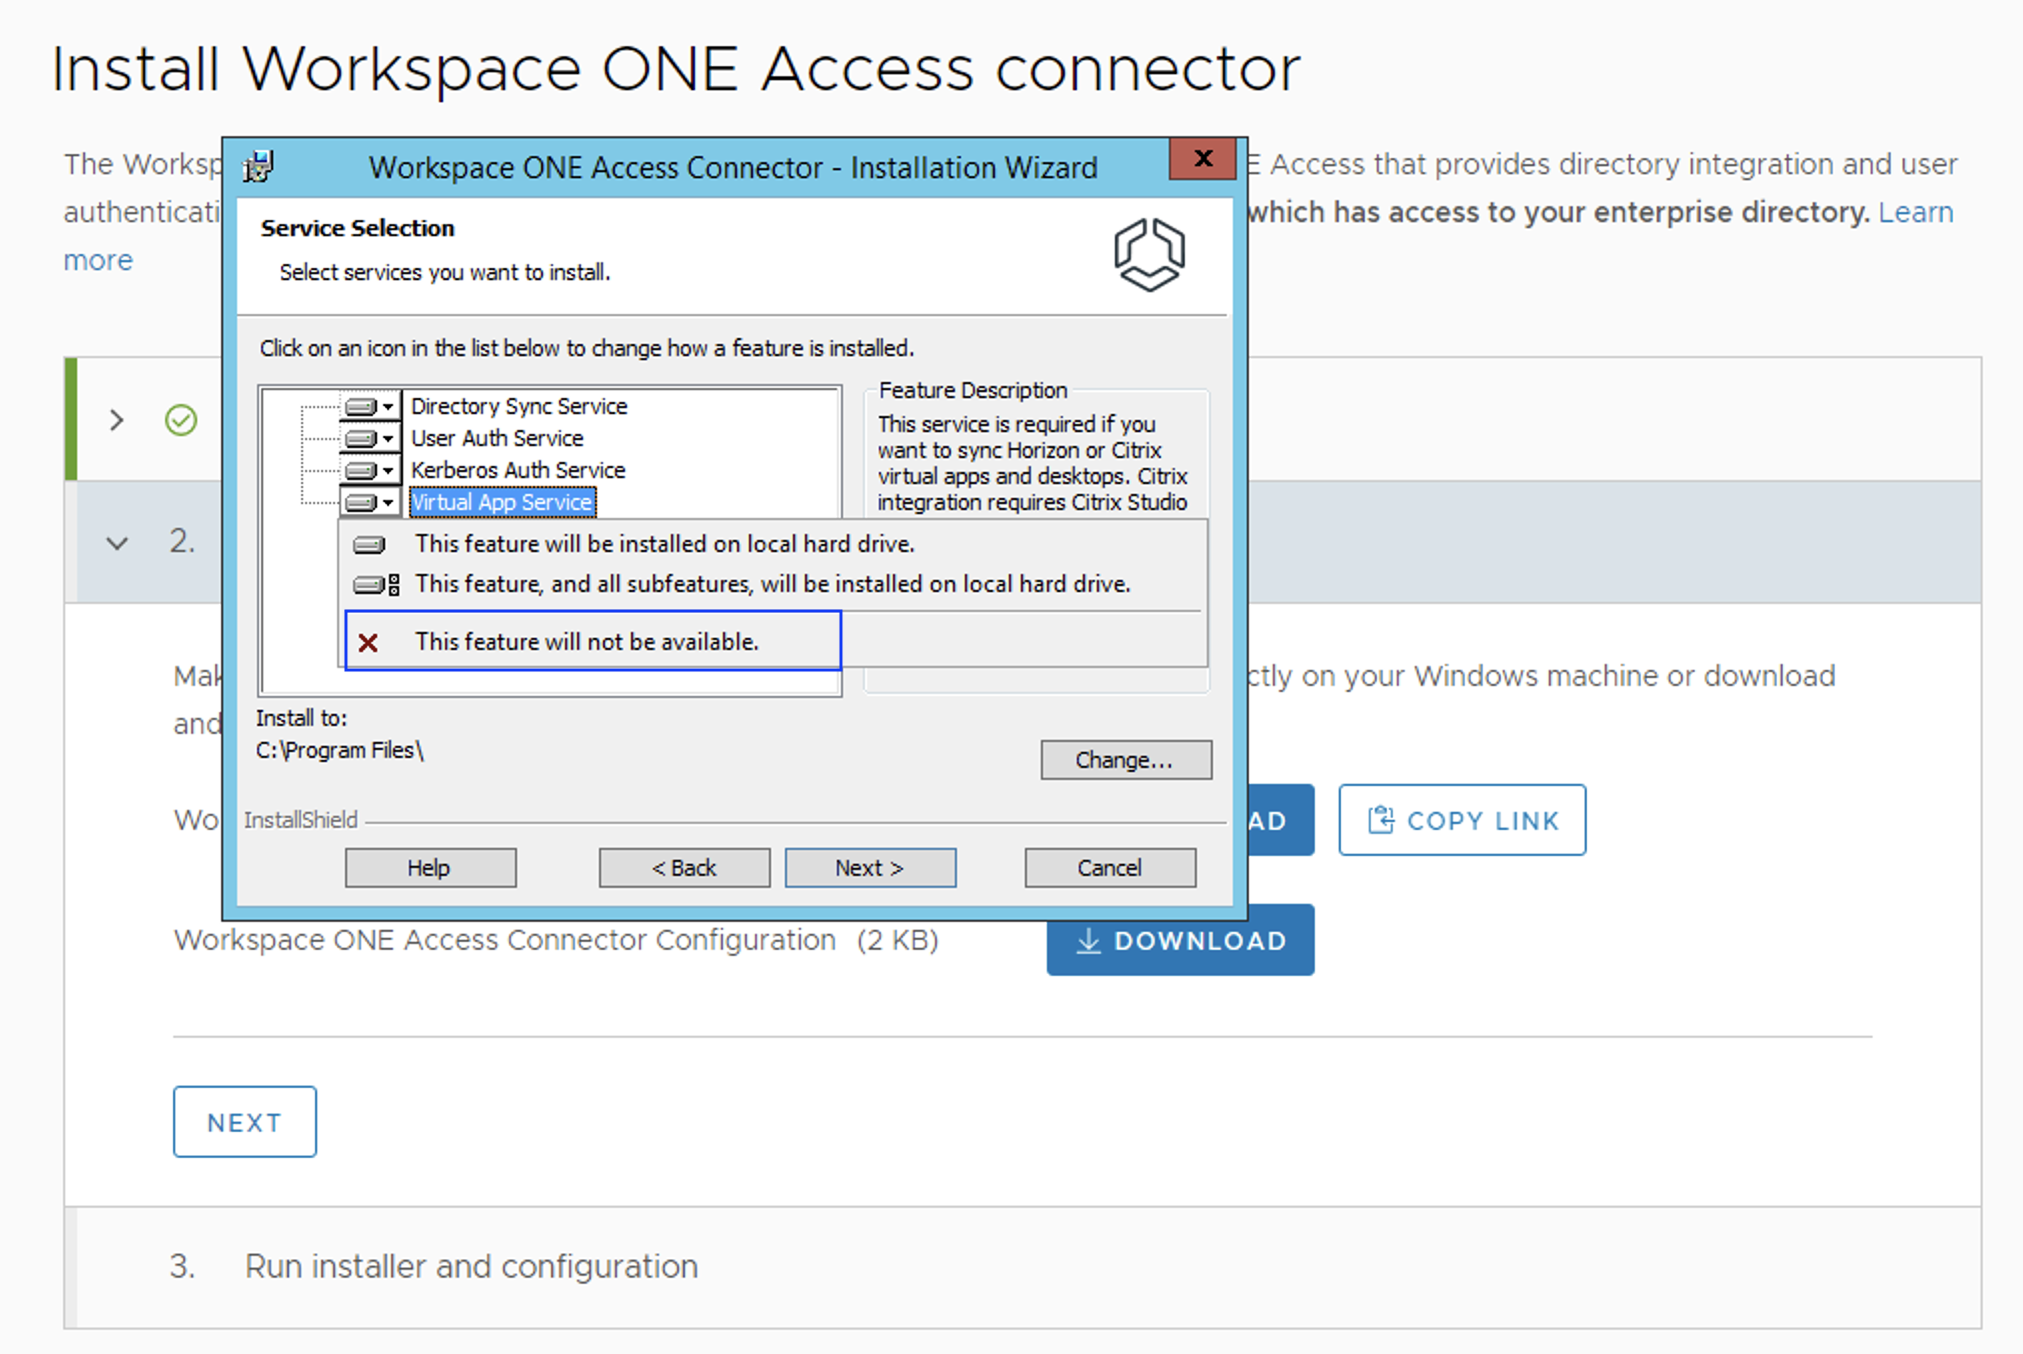 The Virtual App Service deselected in the Workspace ONE Access Connector installation wizard.